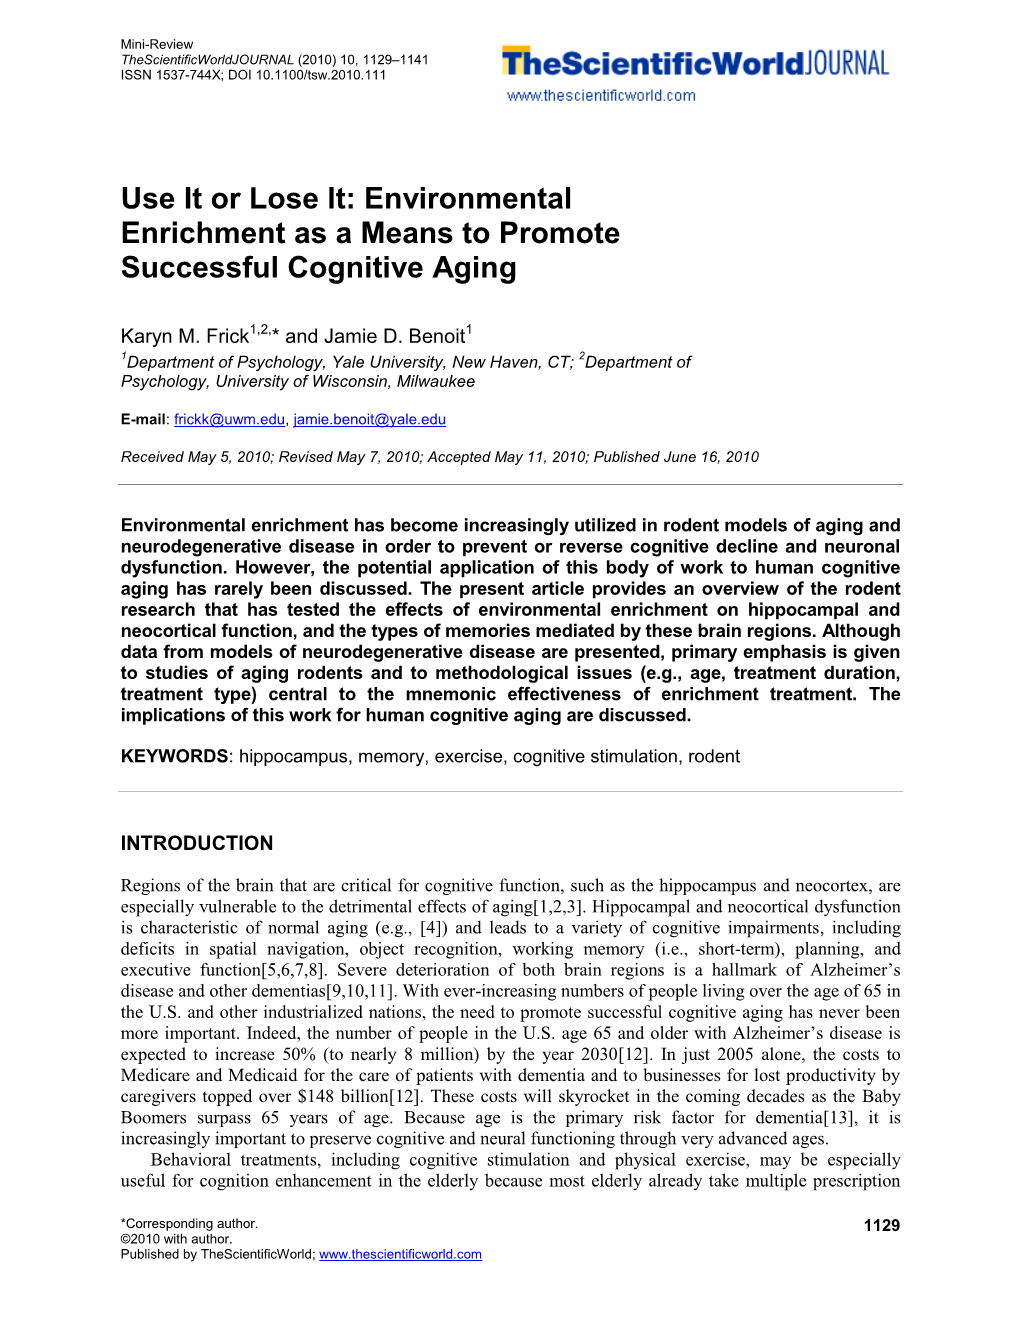 Use It Or Lose It: Environmental Enrichment As a Means to Promote Successful Cognitive Aging